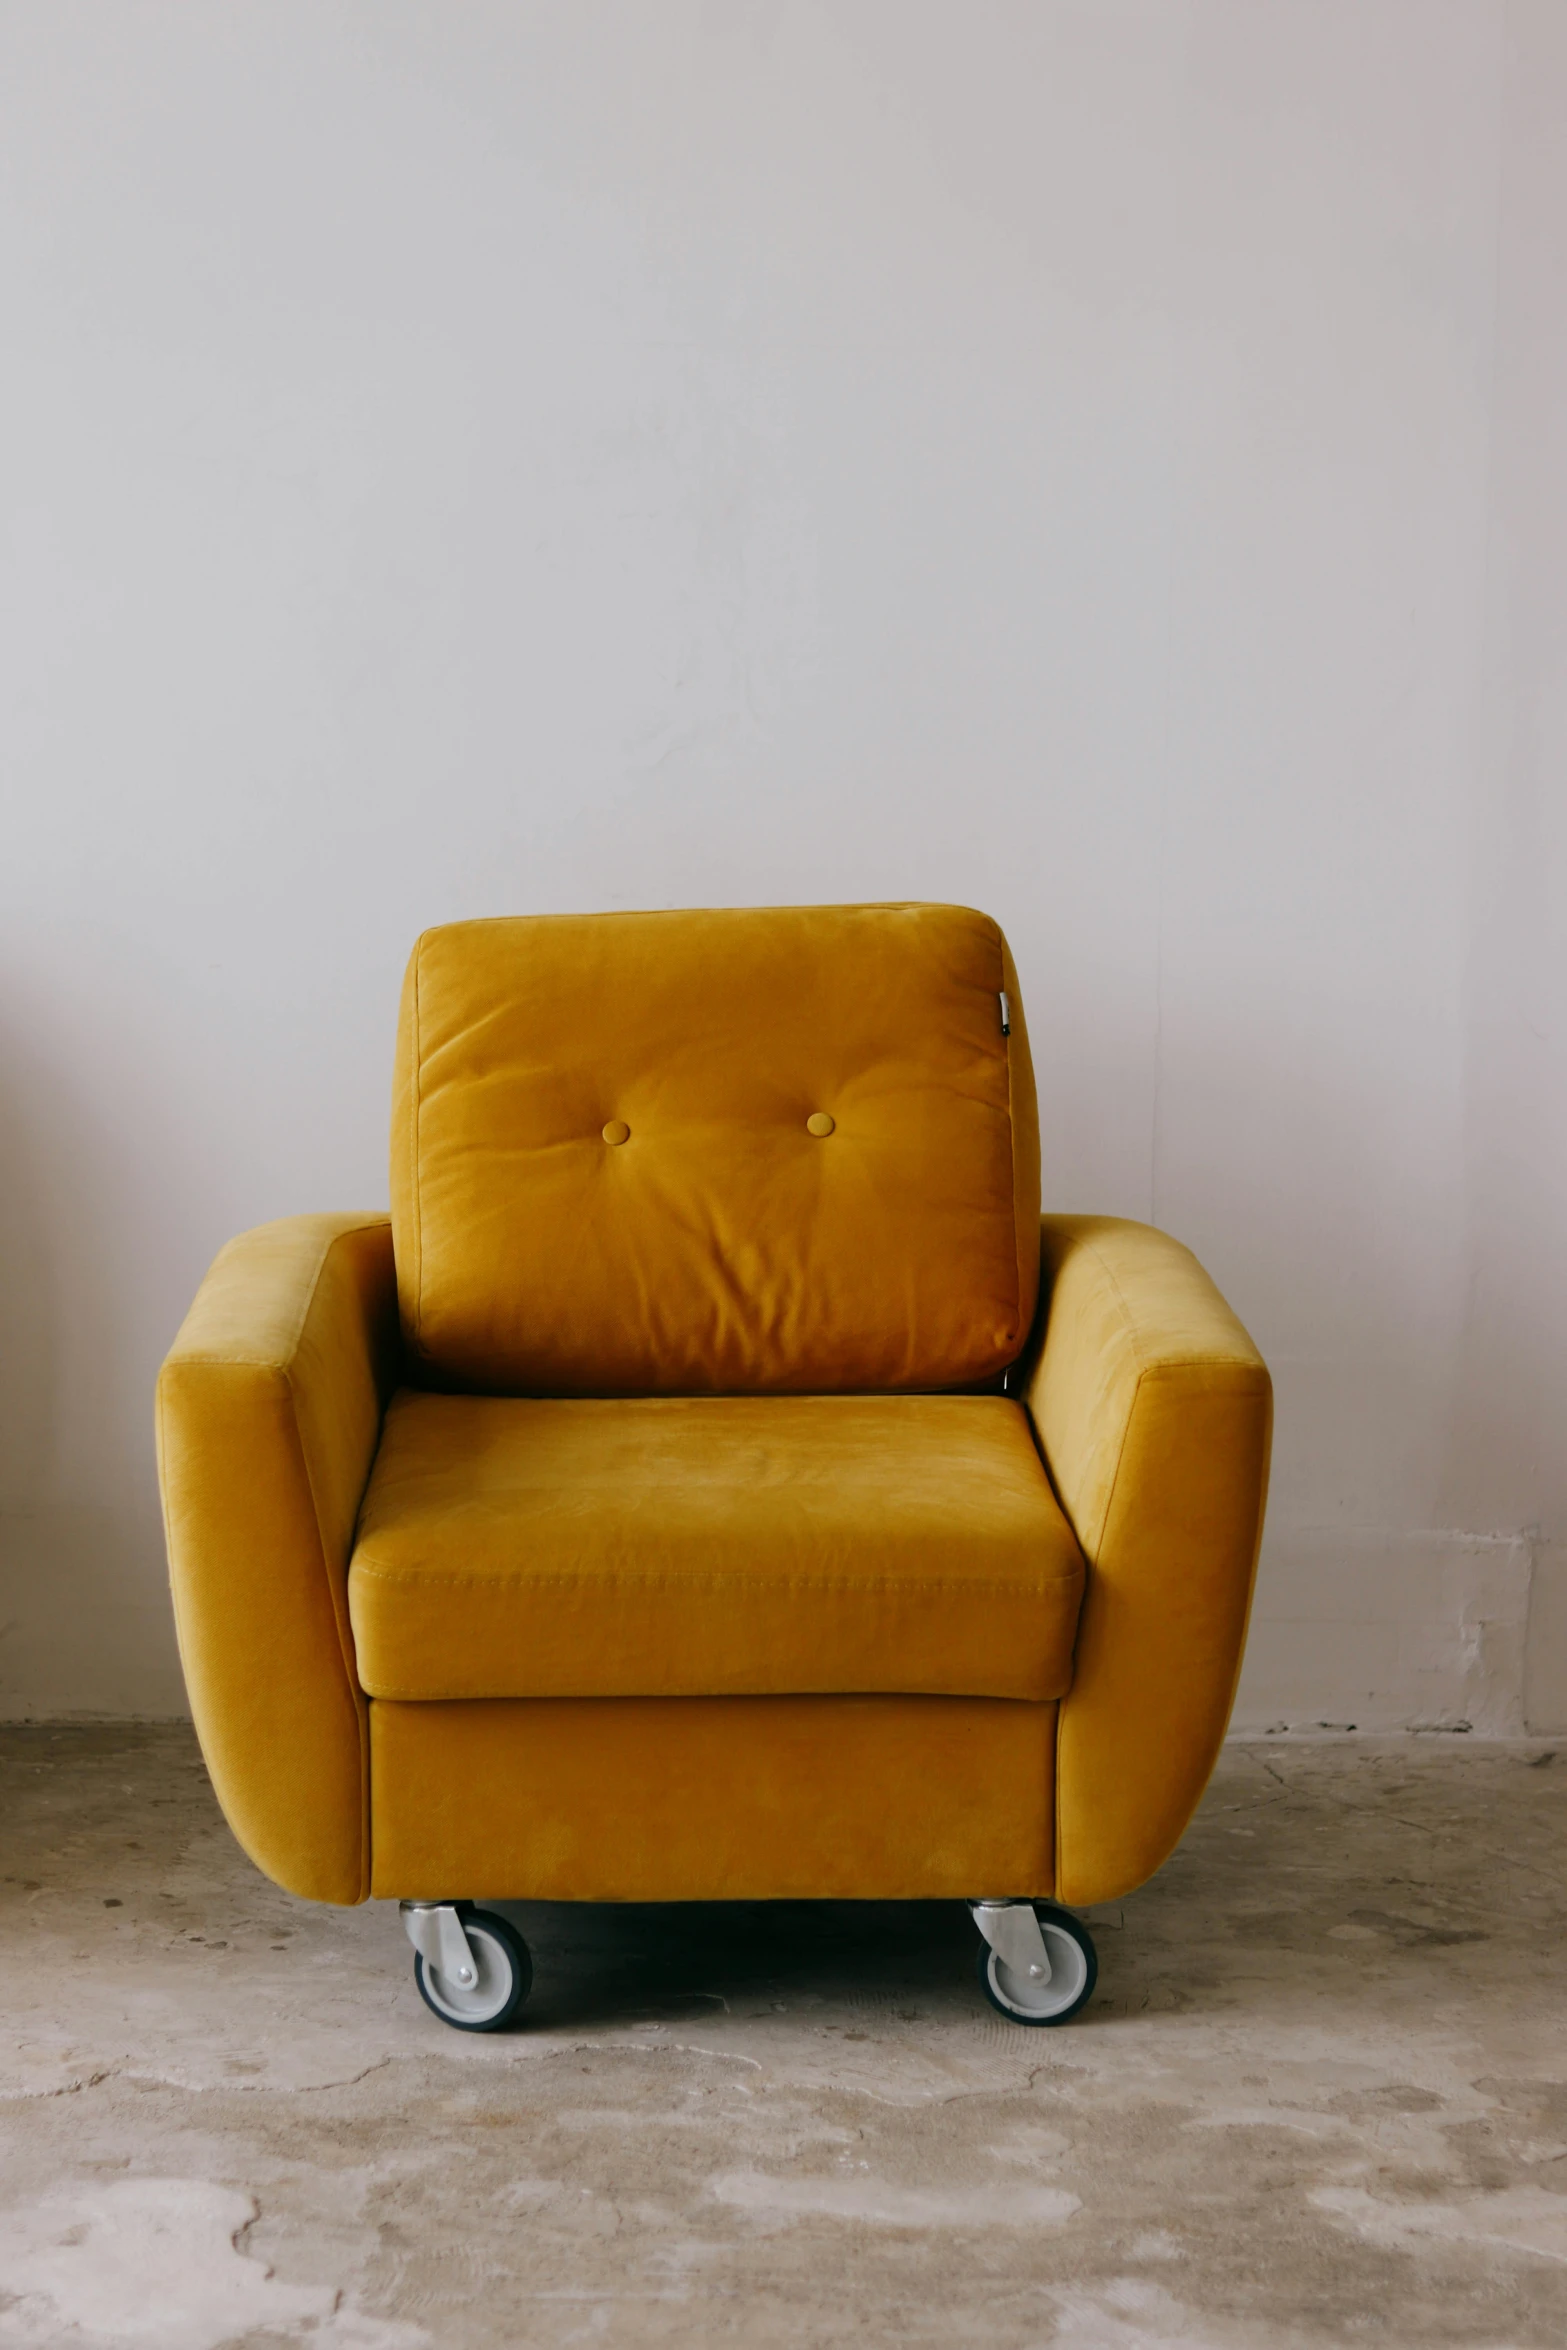 an empty yellow chair against a white wall